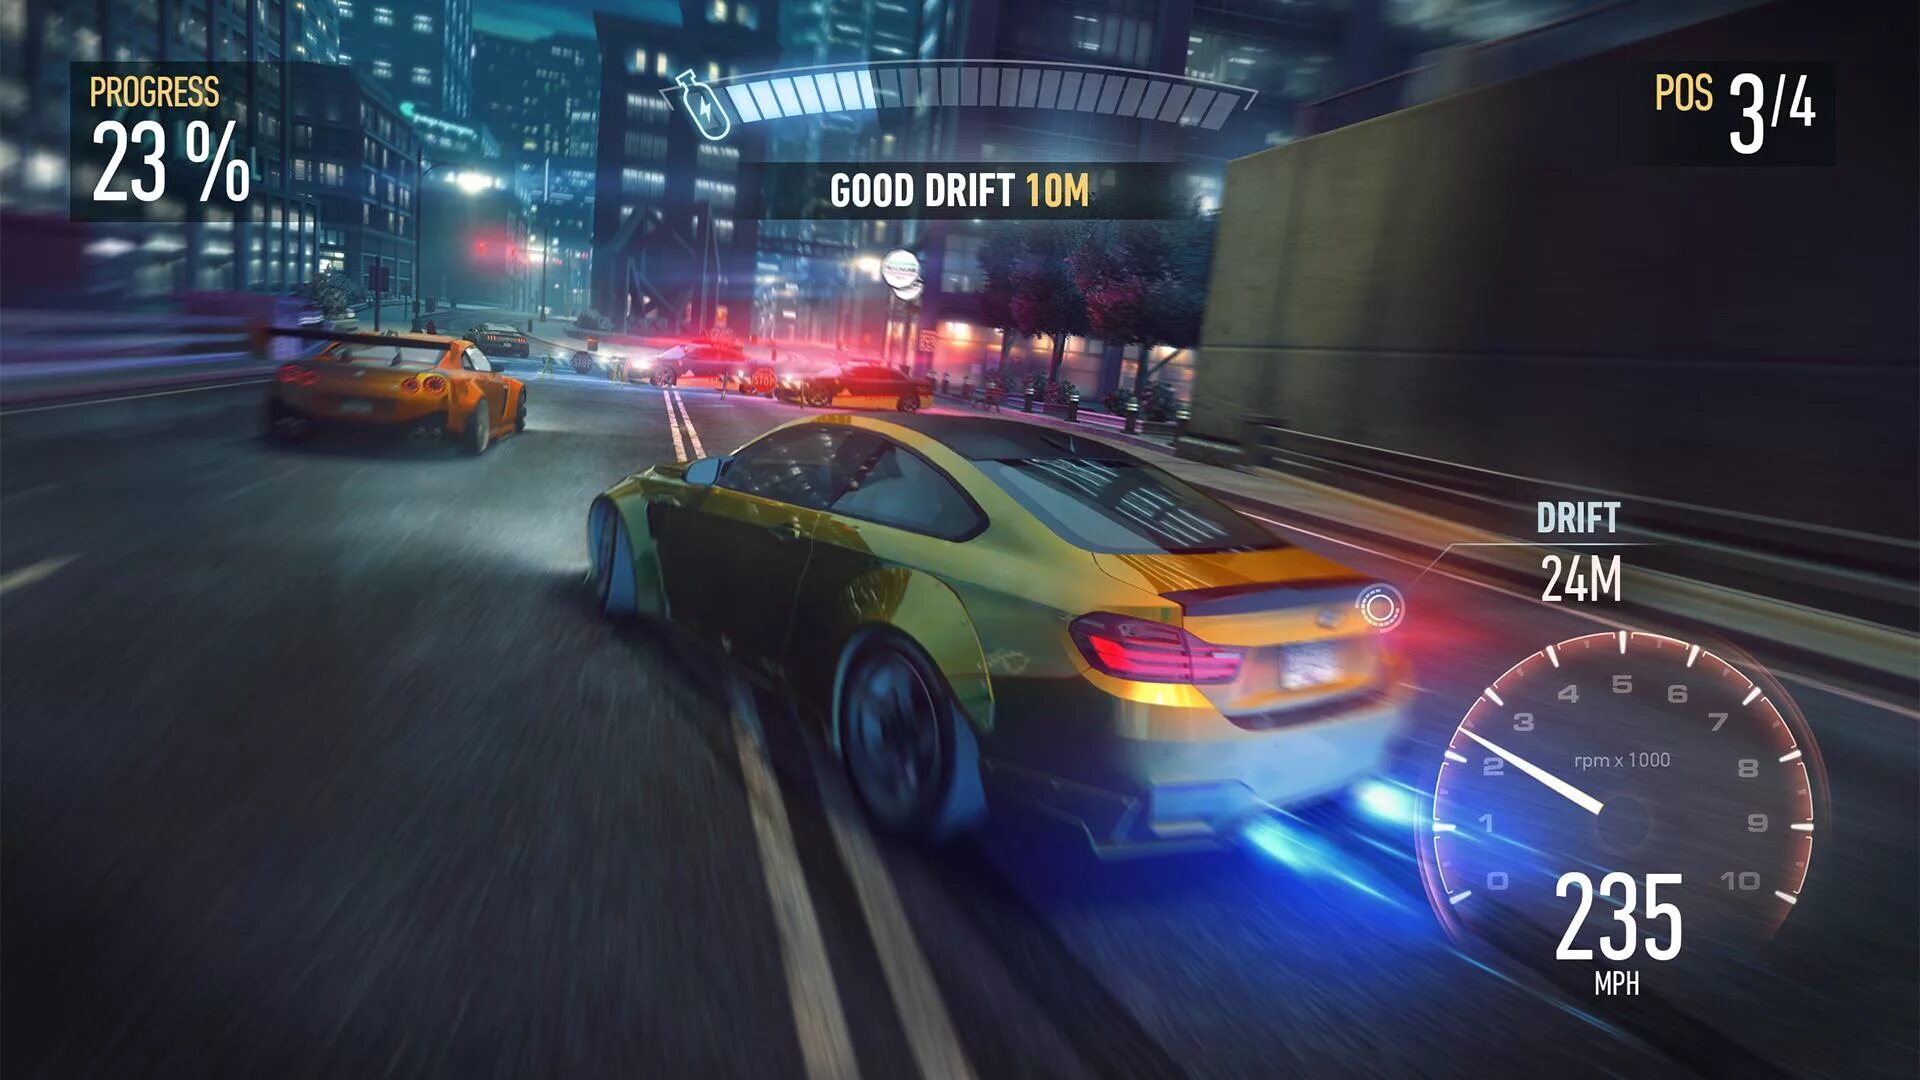 Need for Speed nl гонки. Need for Speed (2015 г.) ). Игра need for Speed no limits похожие игры. Need for Speed no limits 2015. Андроид игры 2010 2015